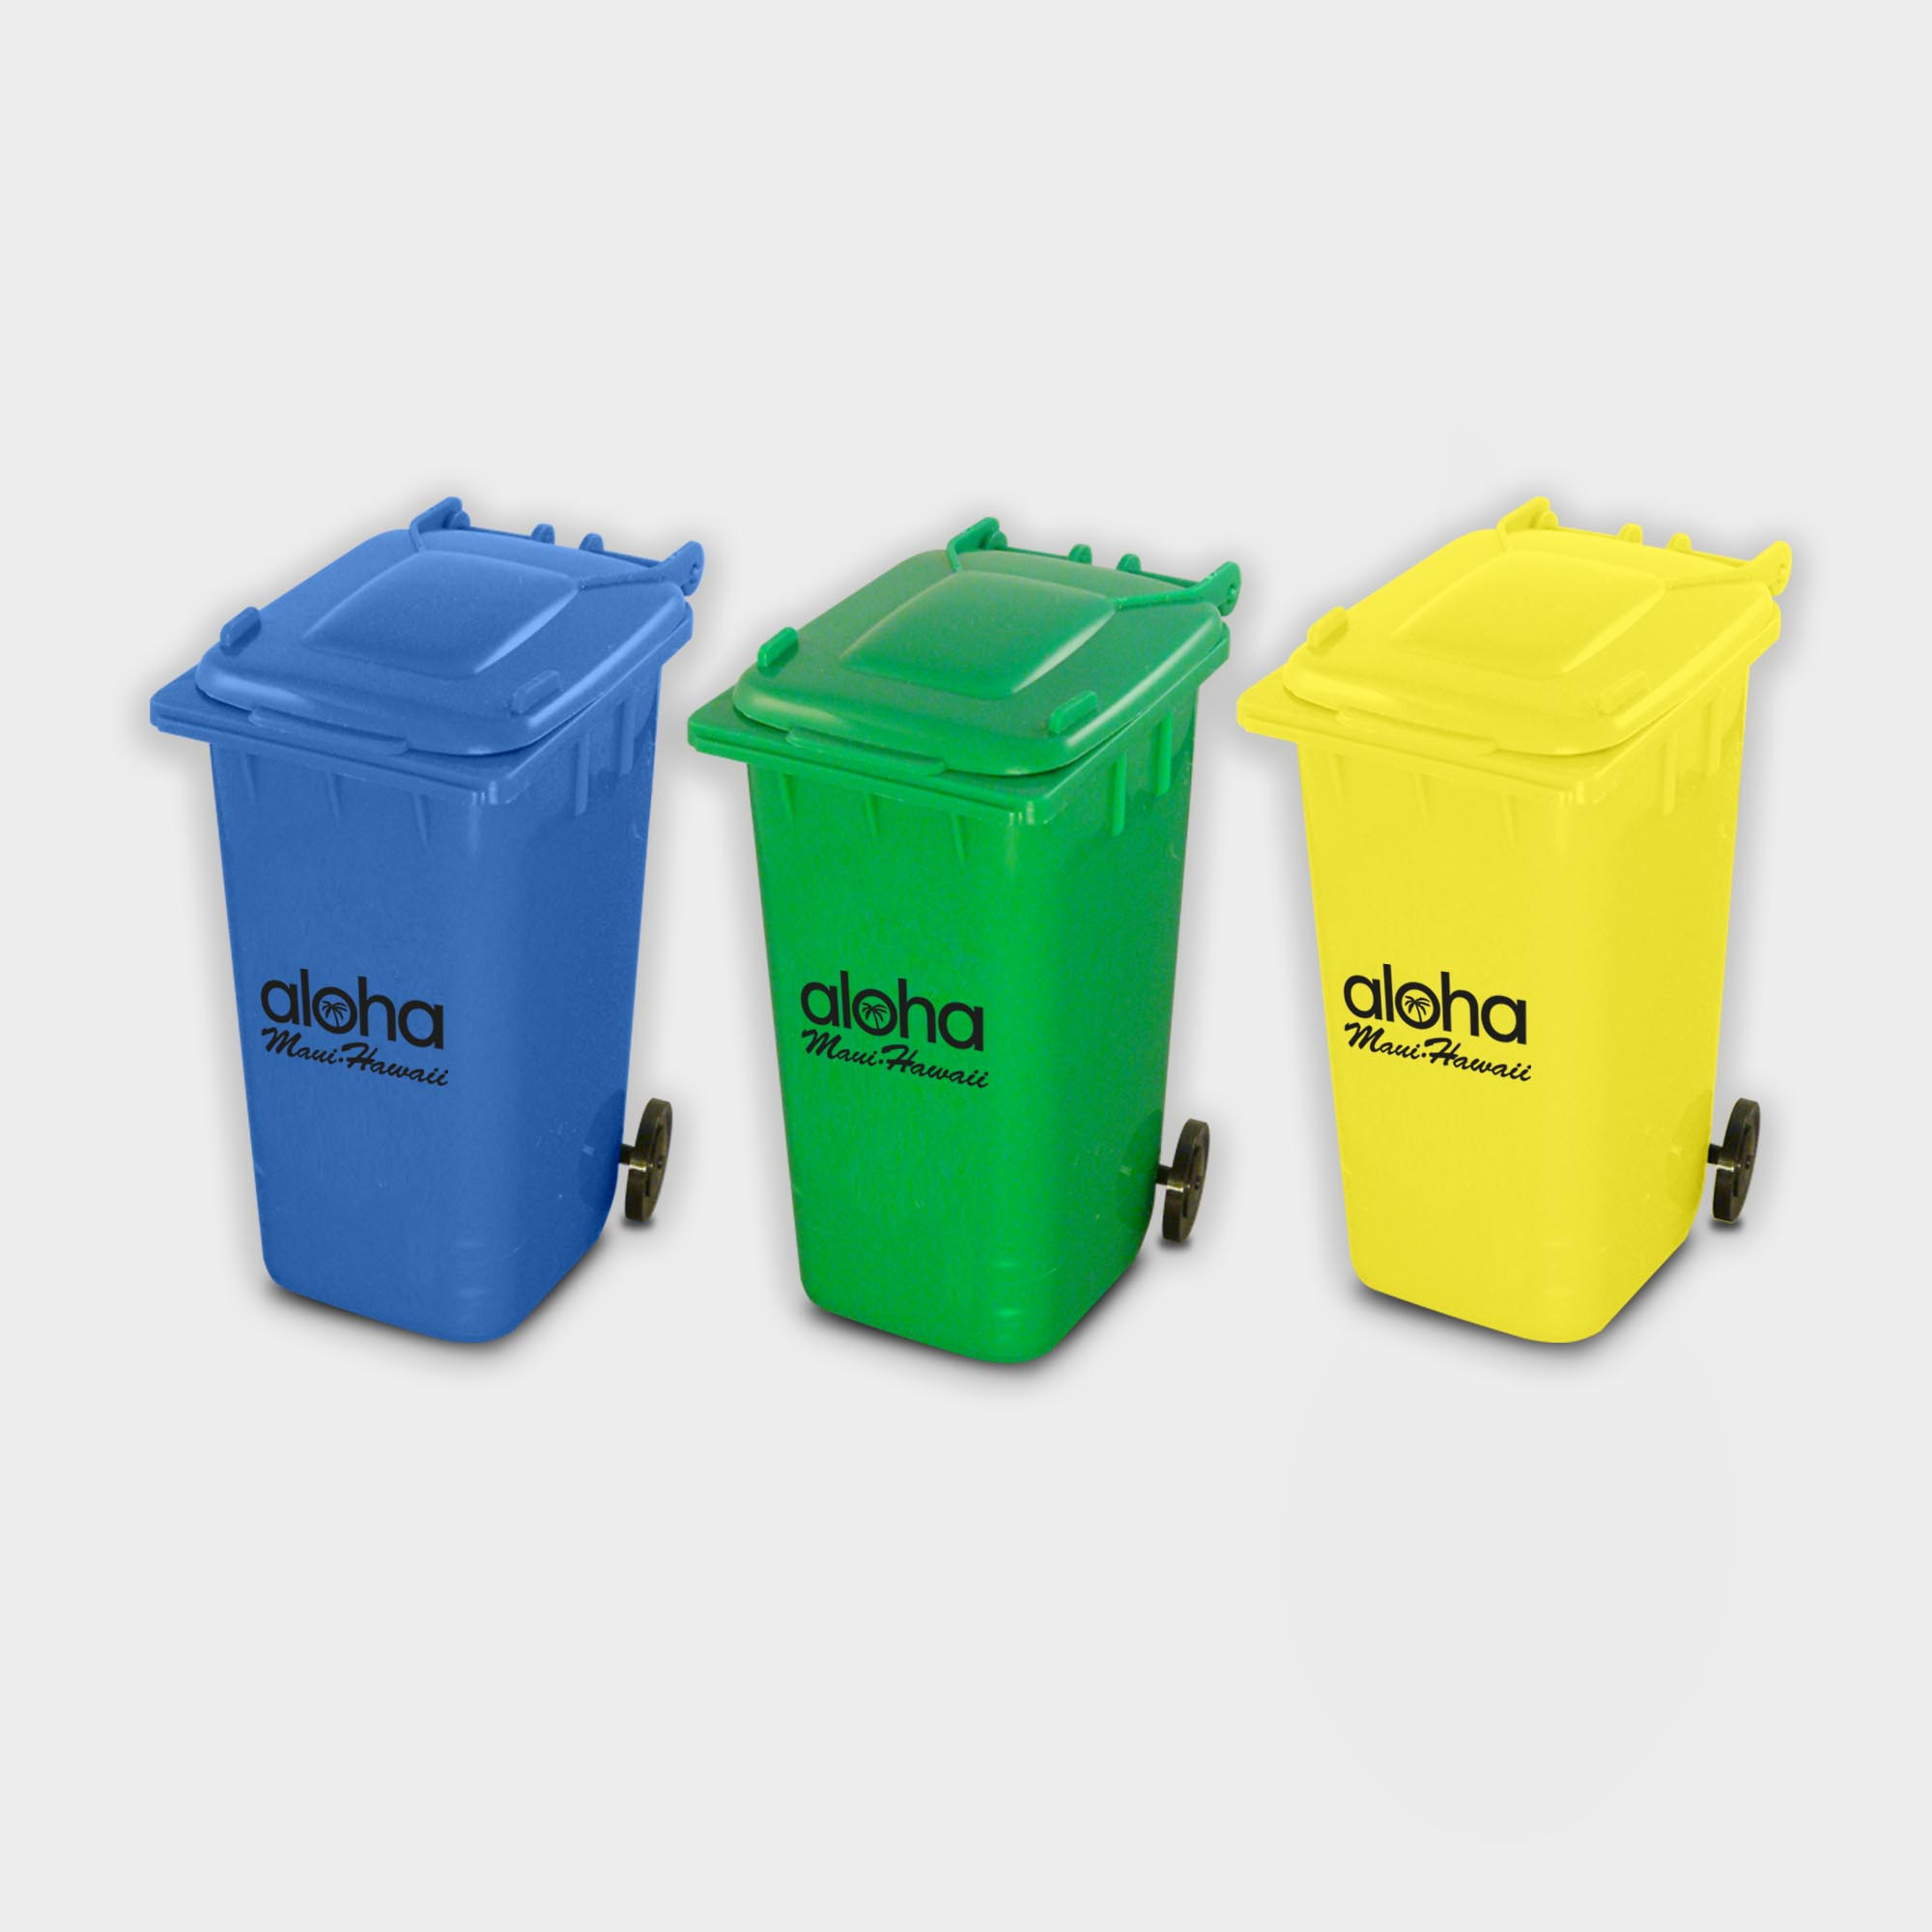 The Green & Good Recycled Plastic Wheelie Bin Pen Pot is made in the EU from recycled Polypropylene. An eco-friendly way to declutter your desk.